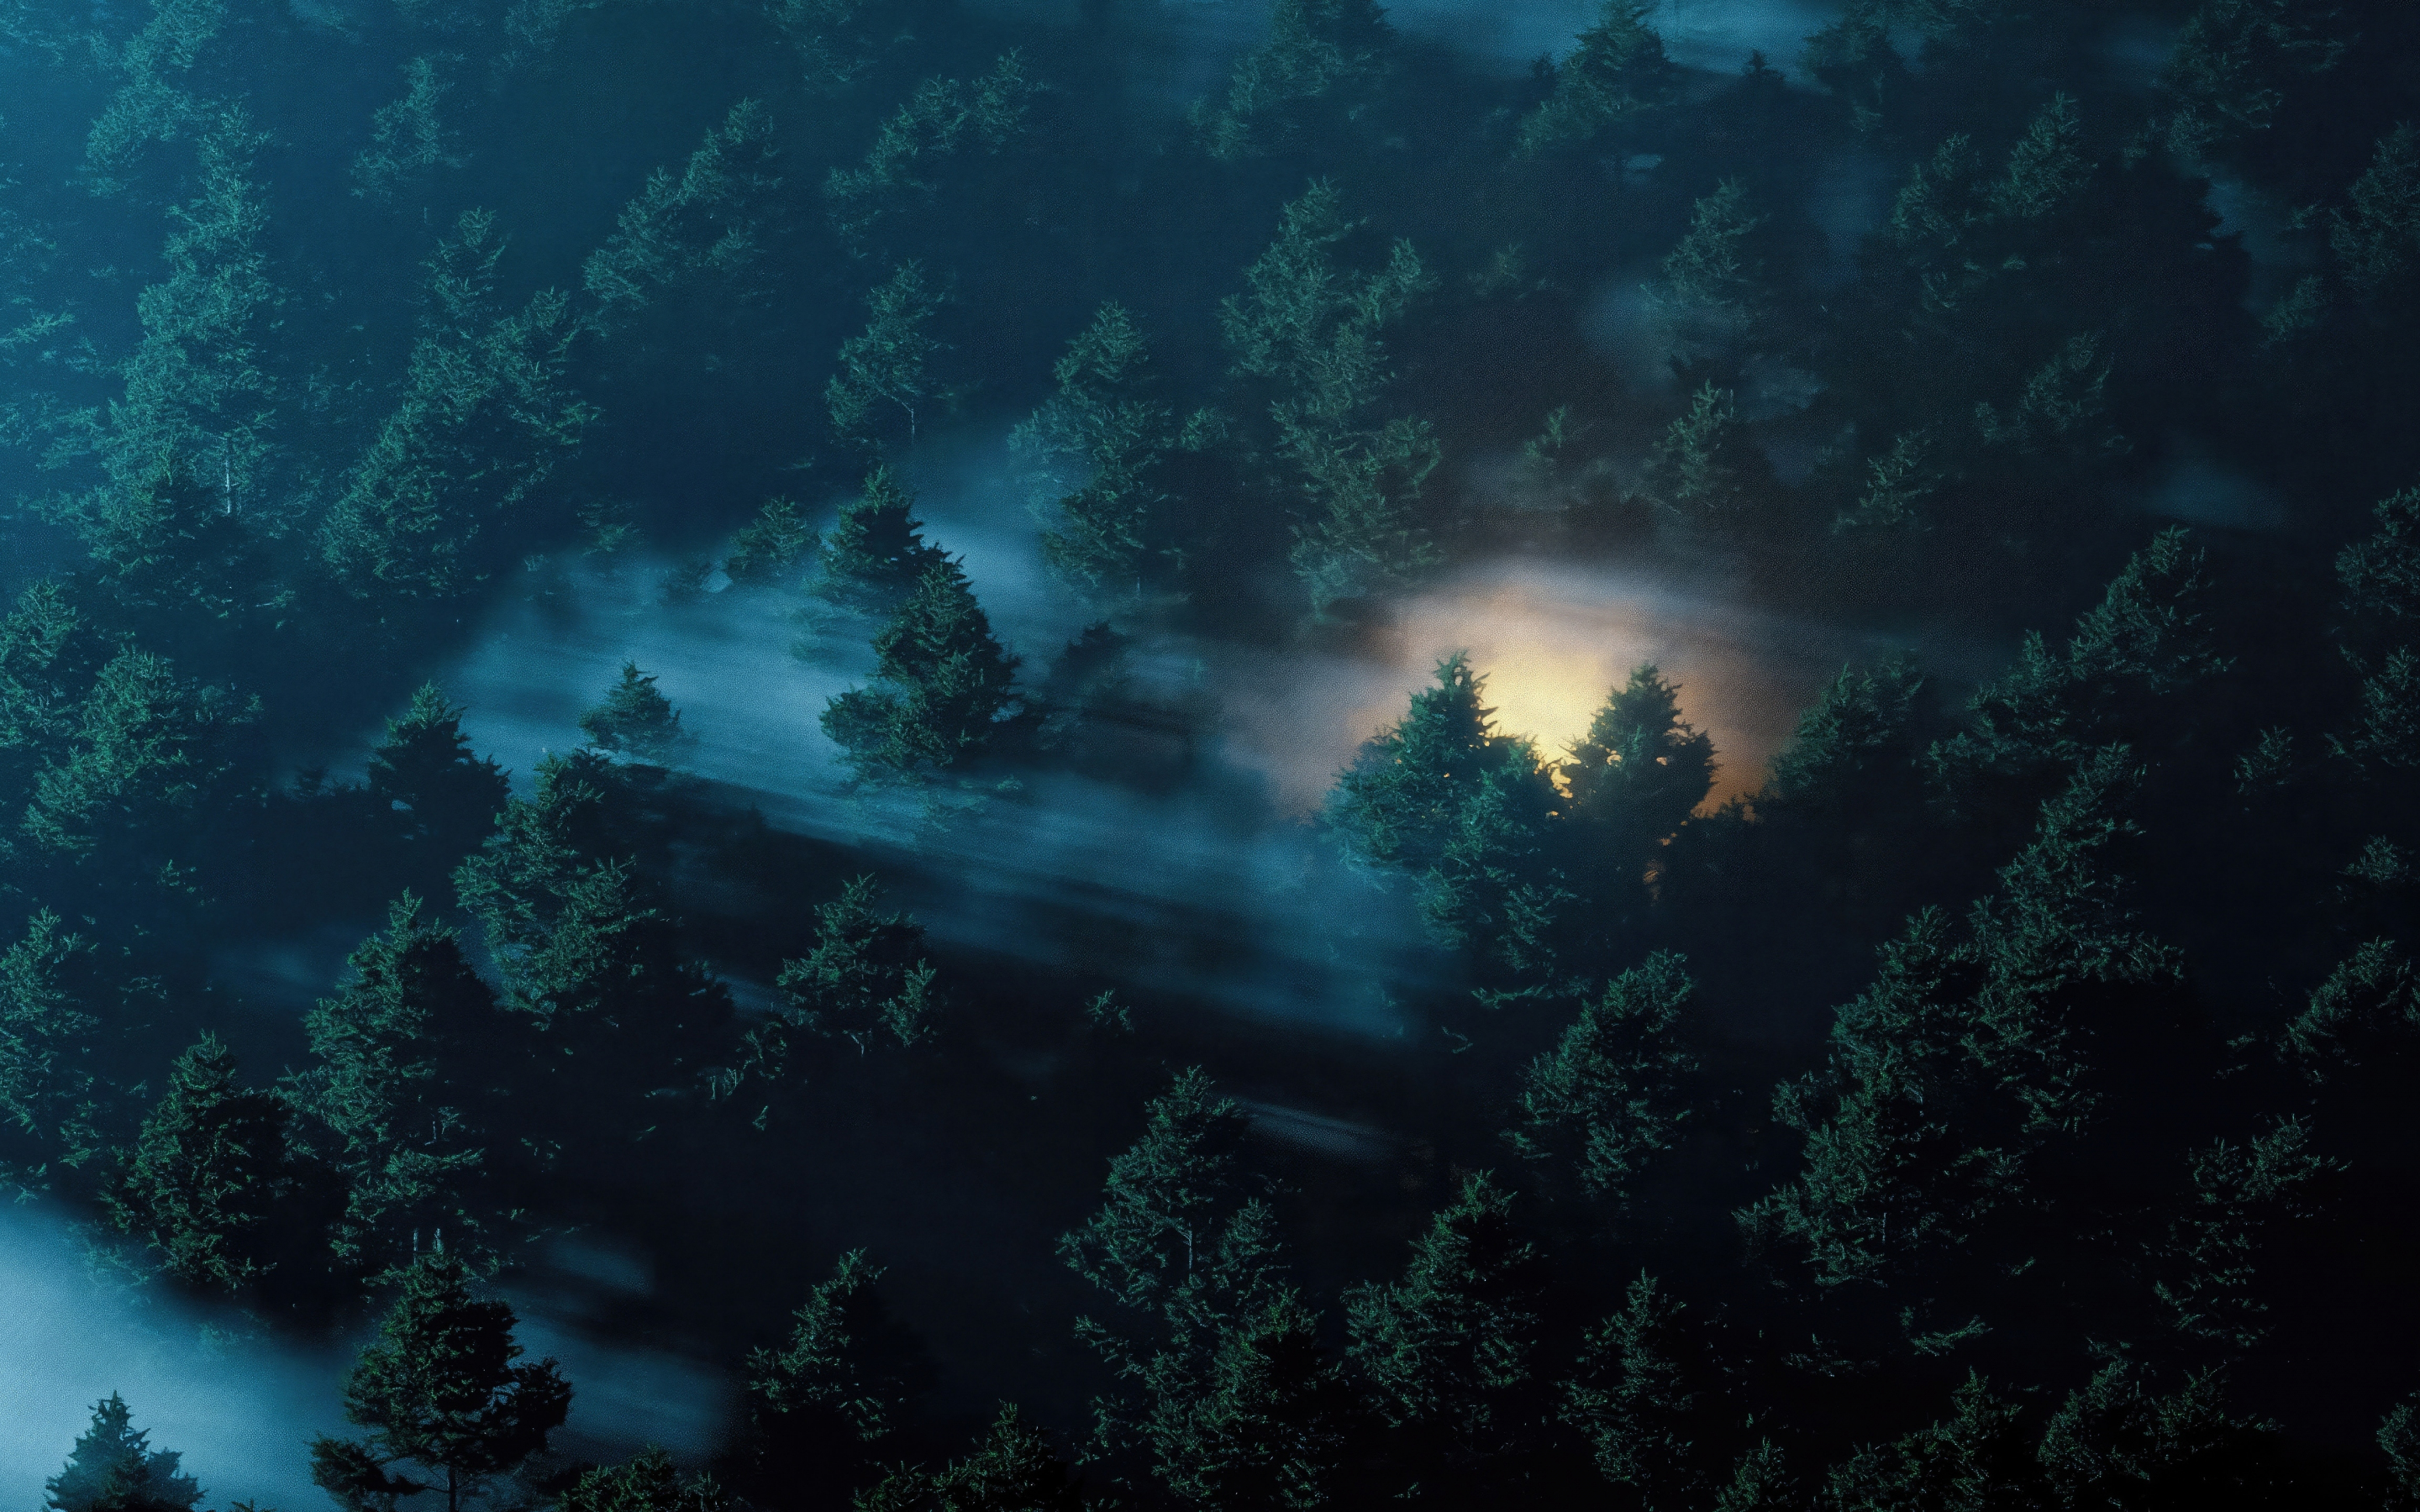 Enchanted morning, twilight in the dark forest, misty day, 2880x1800 wallpaper